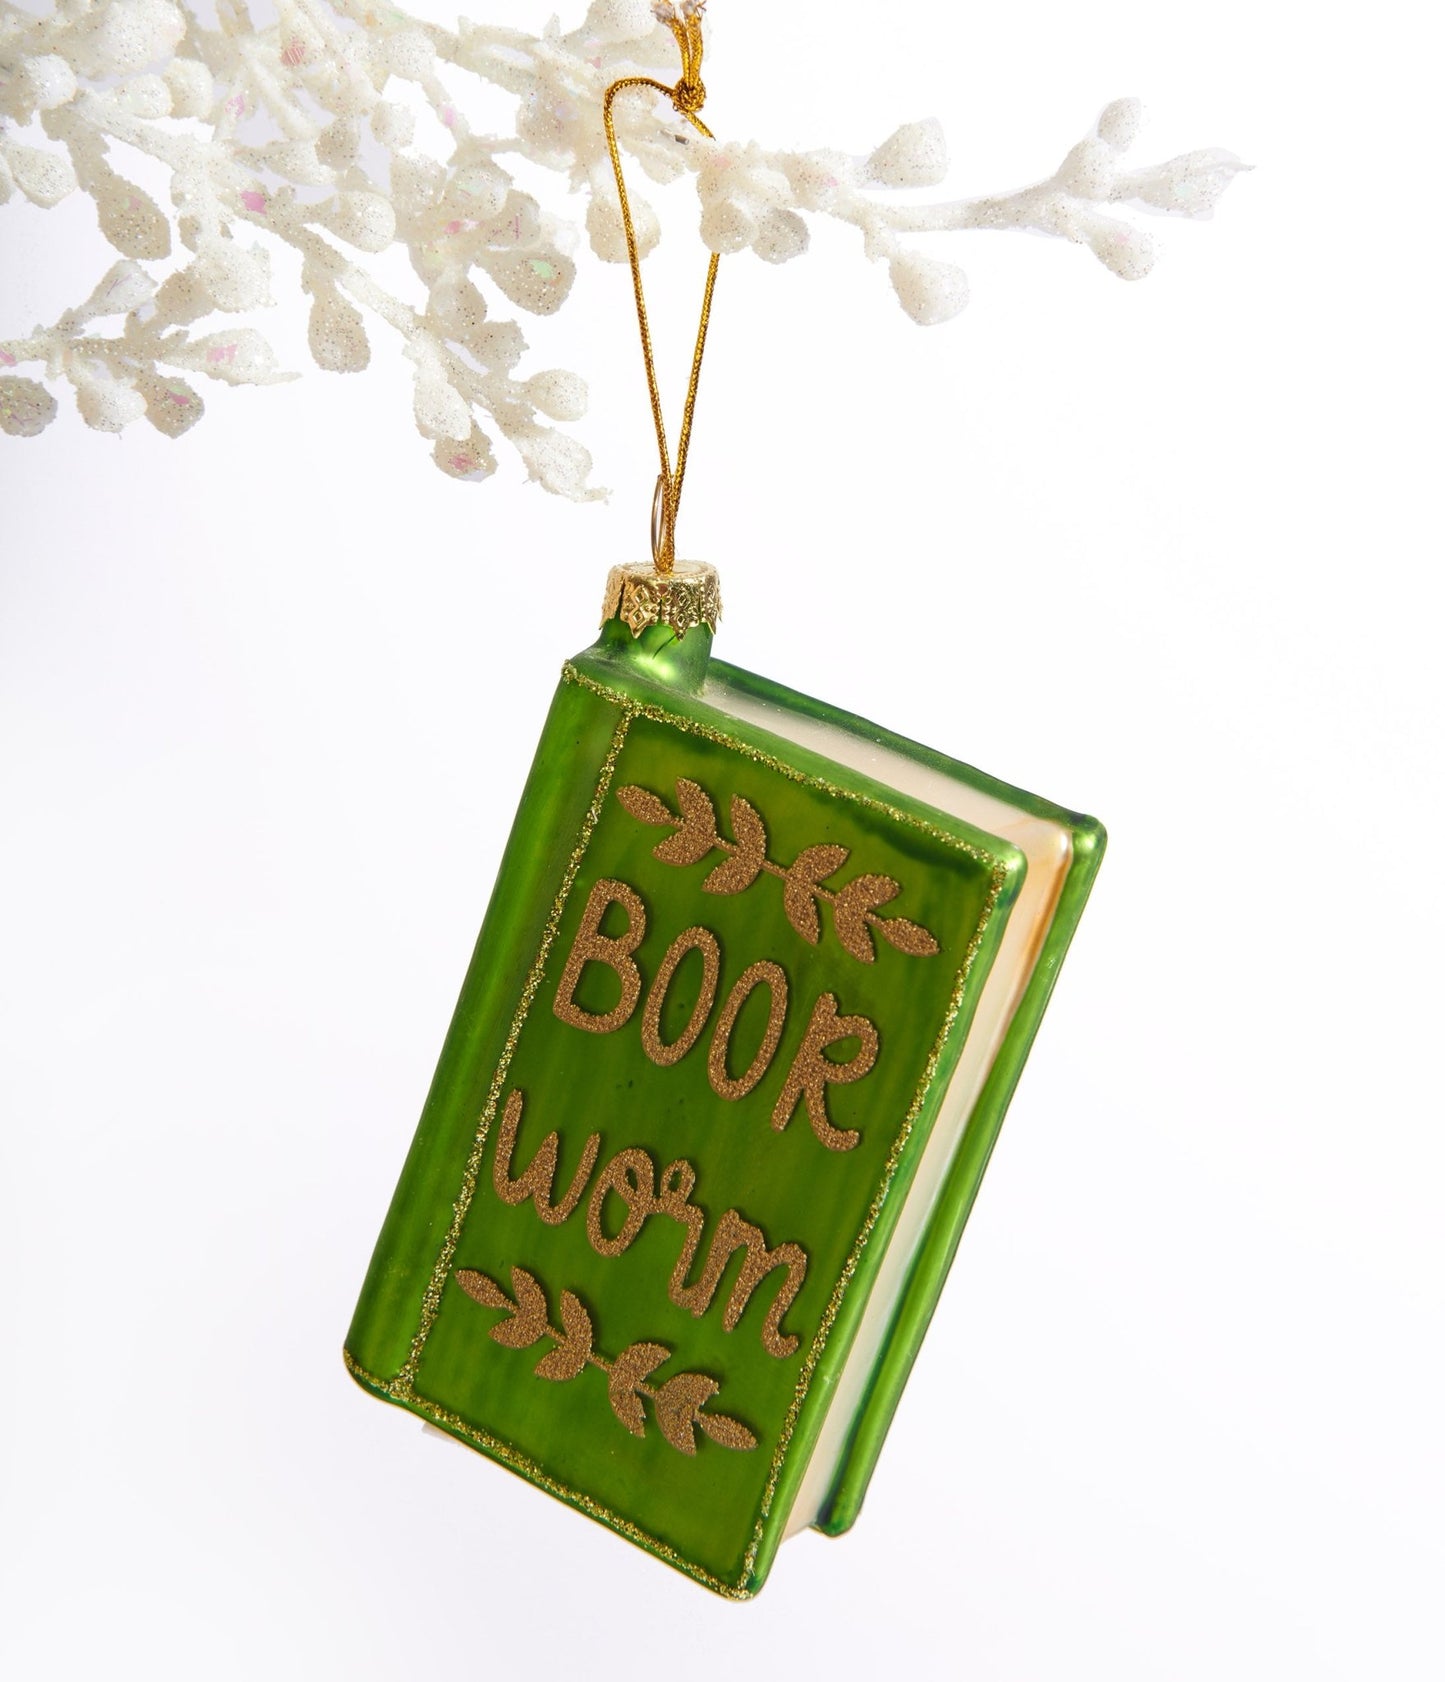 Book Worm Glass Ornament - Unique Vintage - Womens, ACCESSORIES, GIFTS/HOME